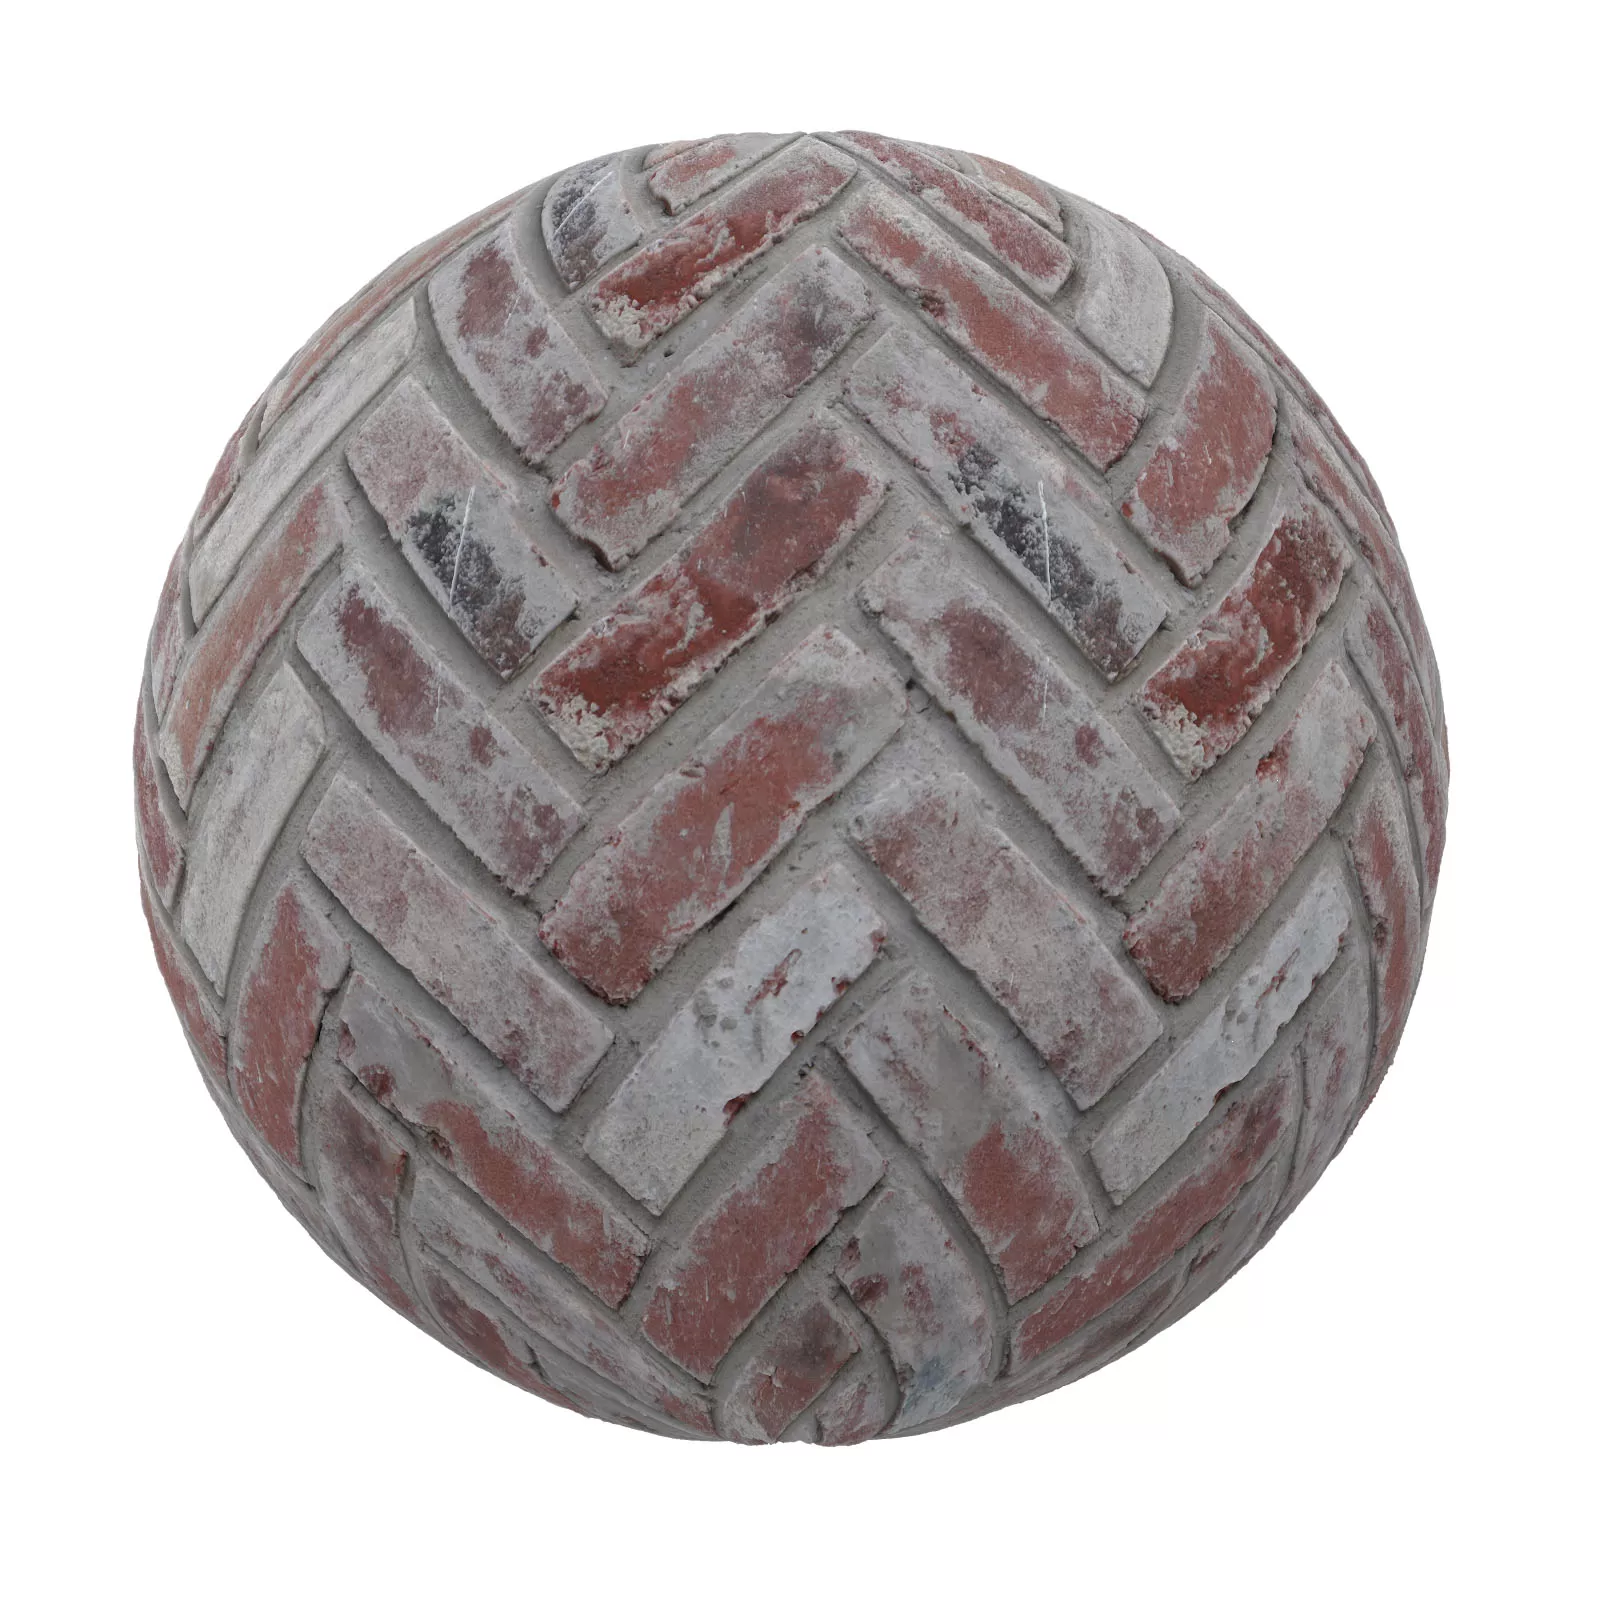 PBR CGAXIS TEXTURES – PAVEMENTS – Rough Red Brick Pavement